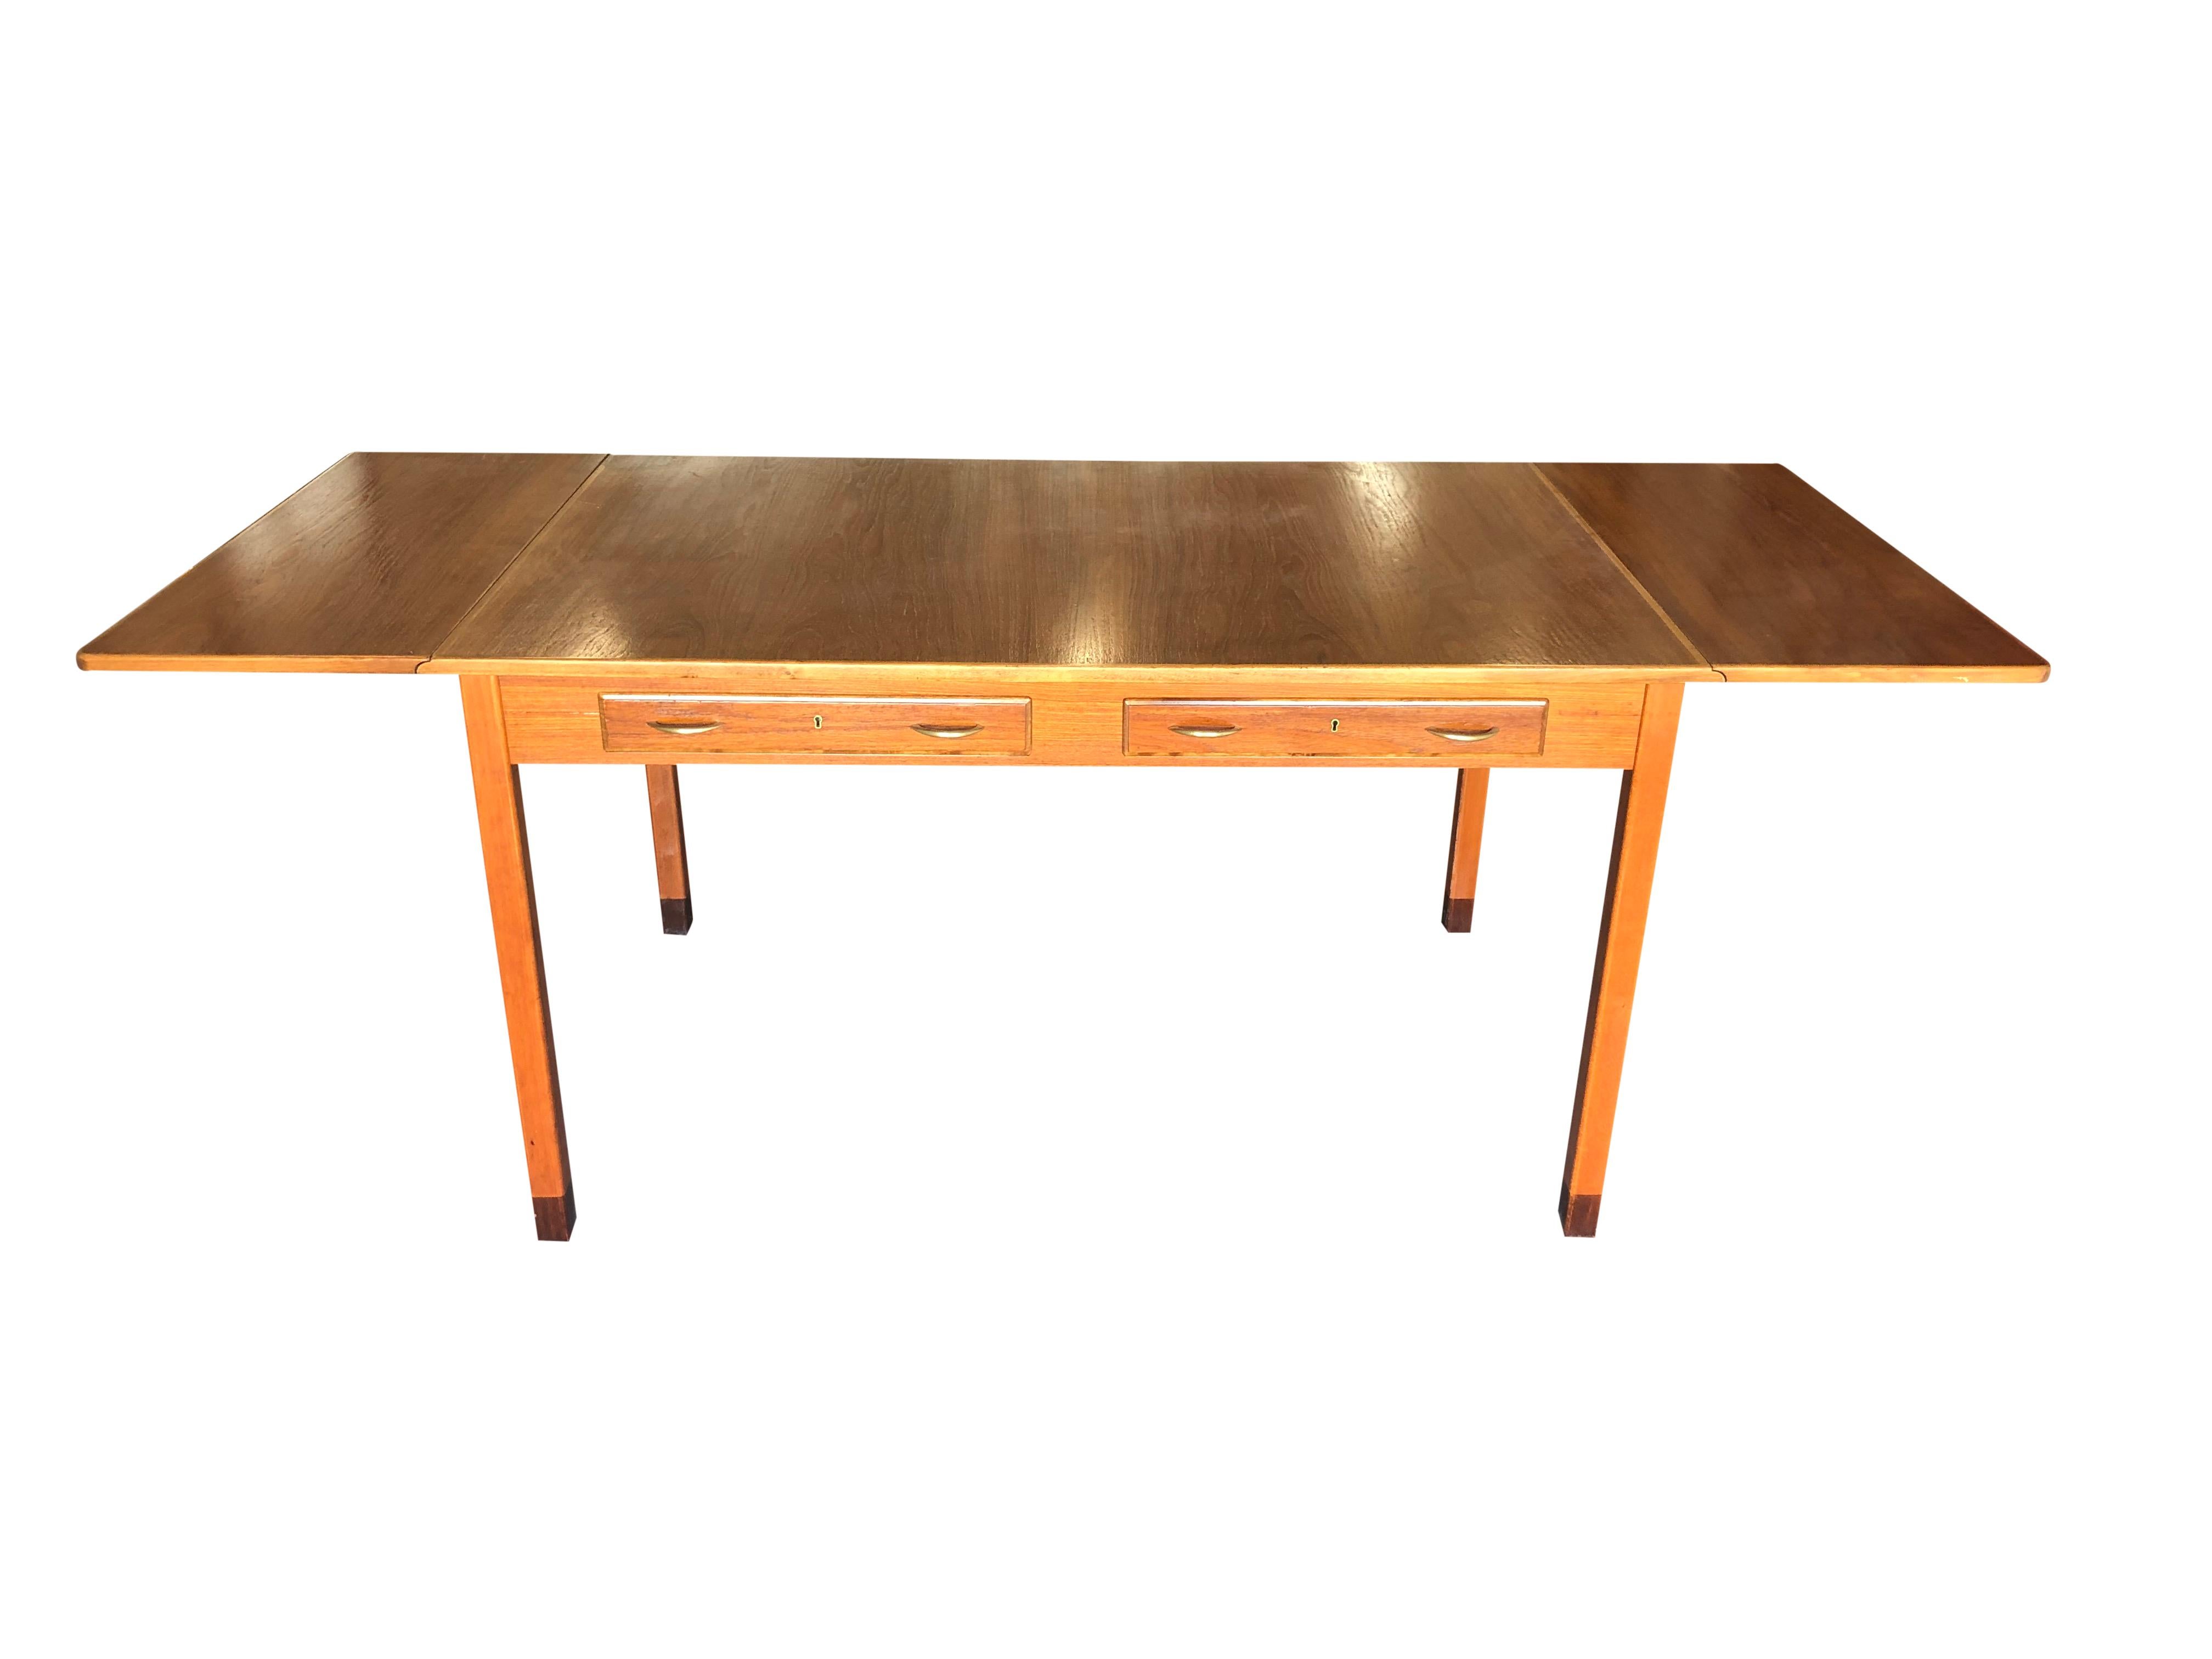 20th Century Swedish Teakwood Writing Table - Vintage Office Desk by David Rosén In Good Condition For Sale In West Palm Beach, FL